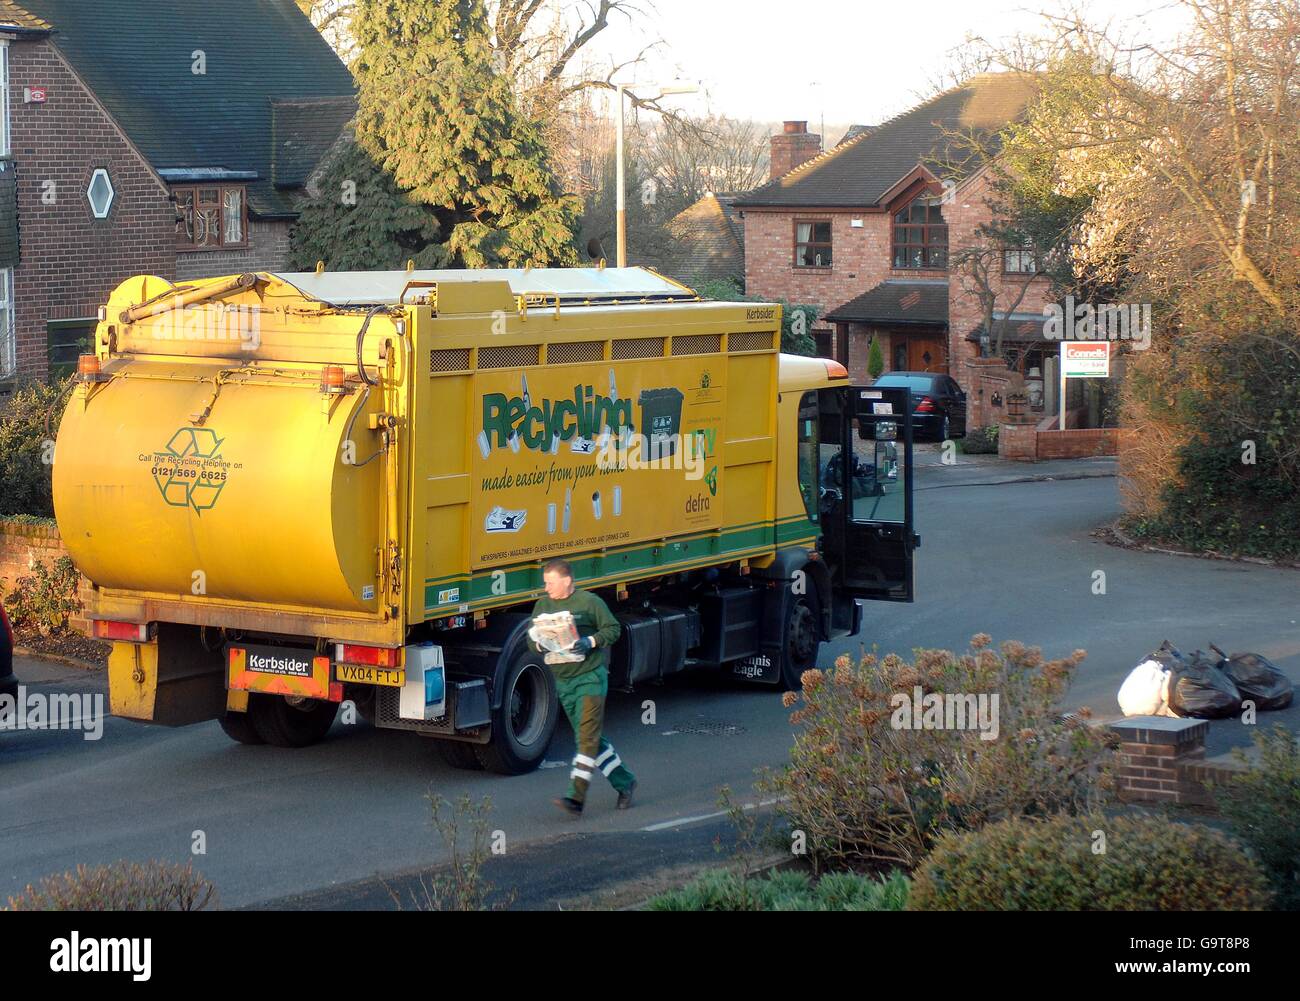 A refuse vehicle in Sandwell, West Midlands, collects domestic rubbish for recycling. Stock Photo